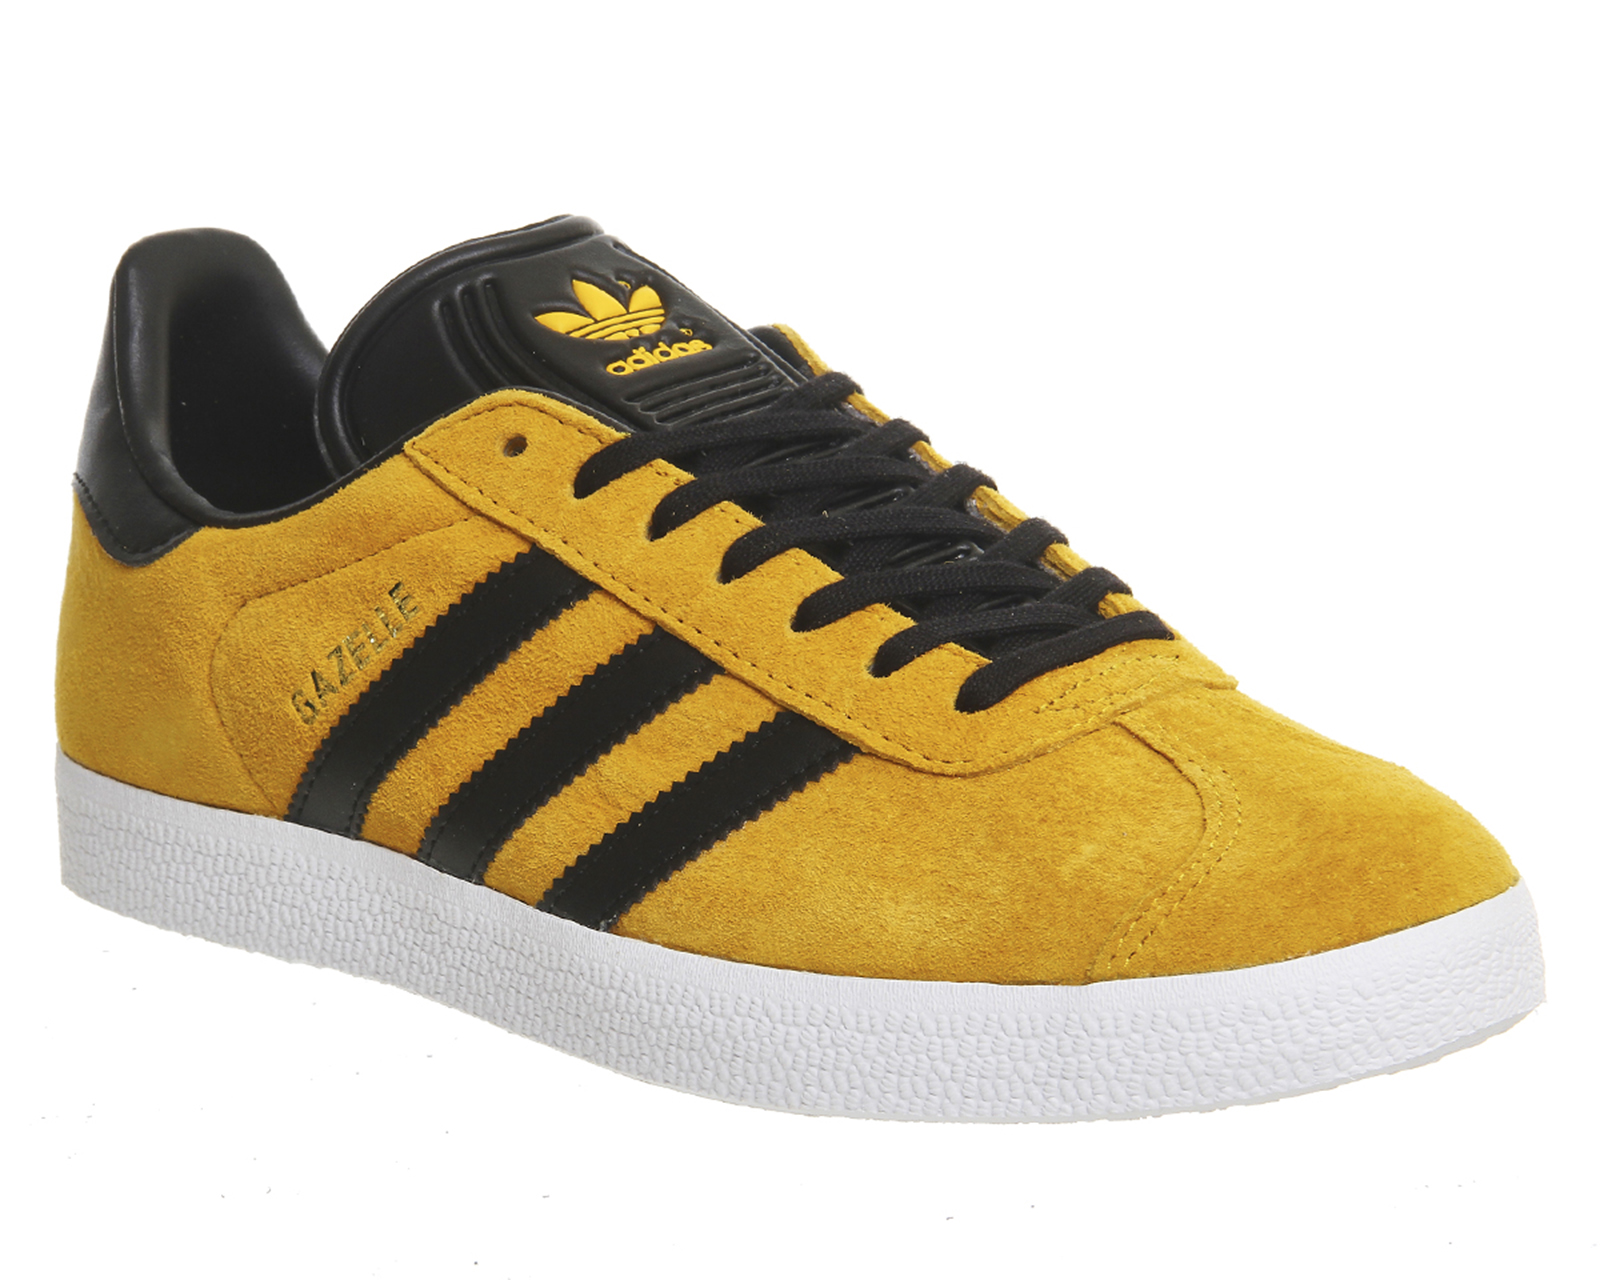 adidas gazelle black and gold suede